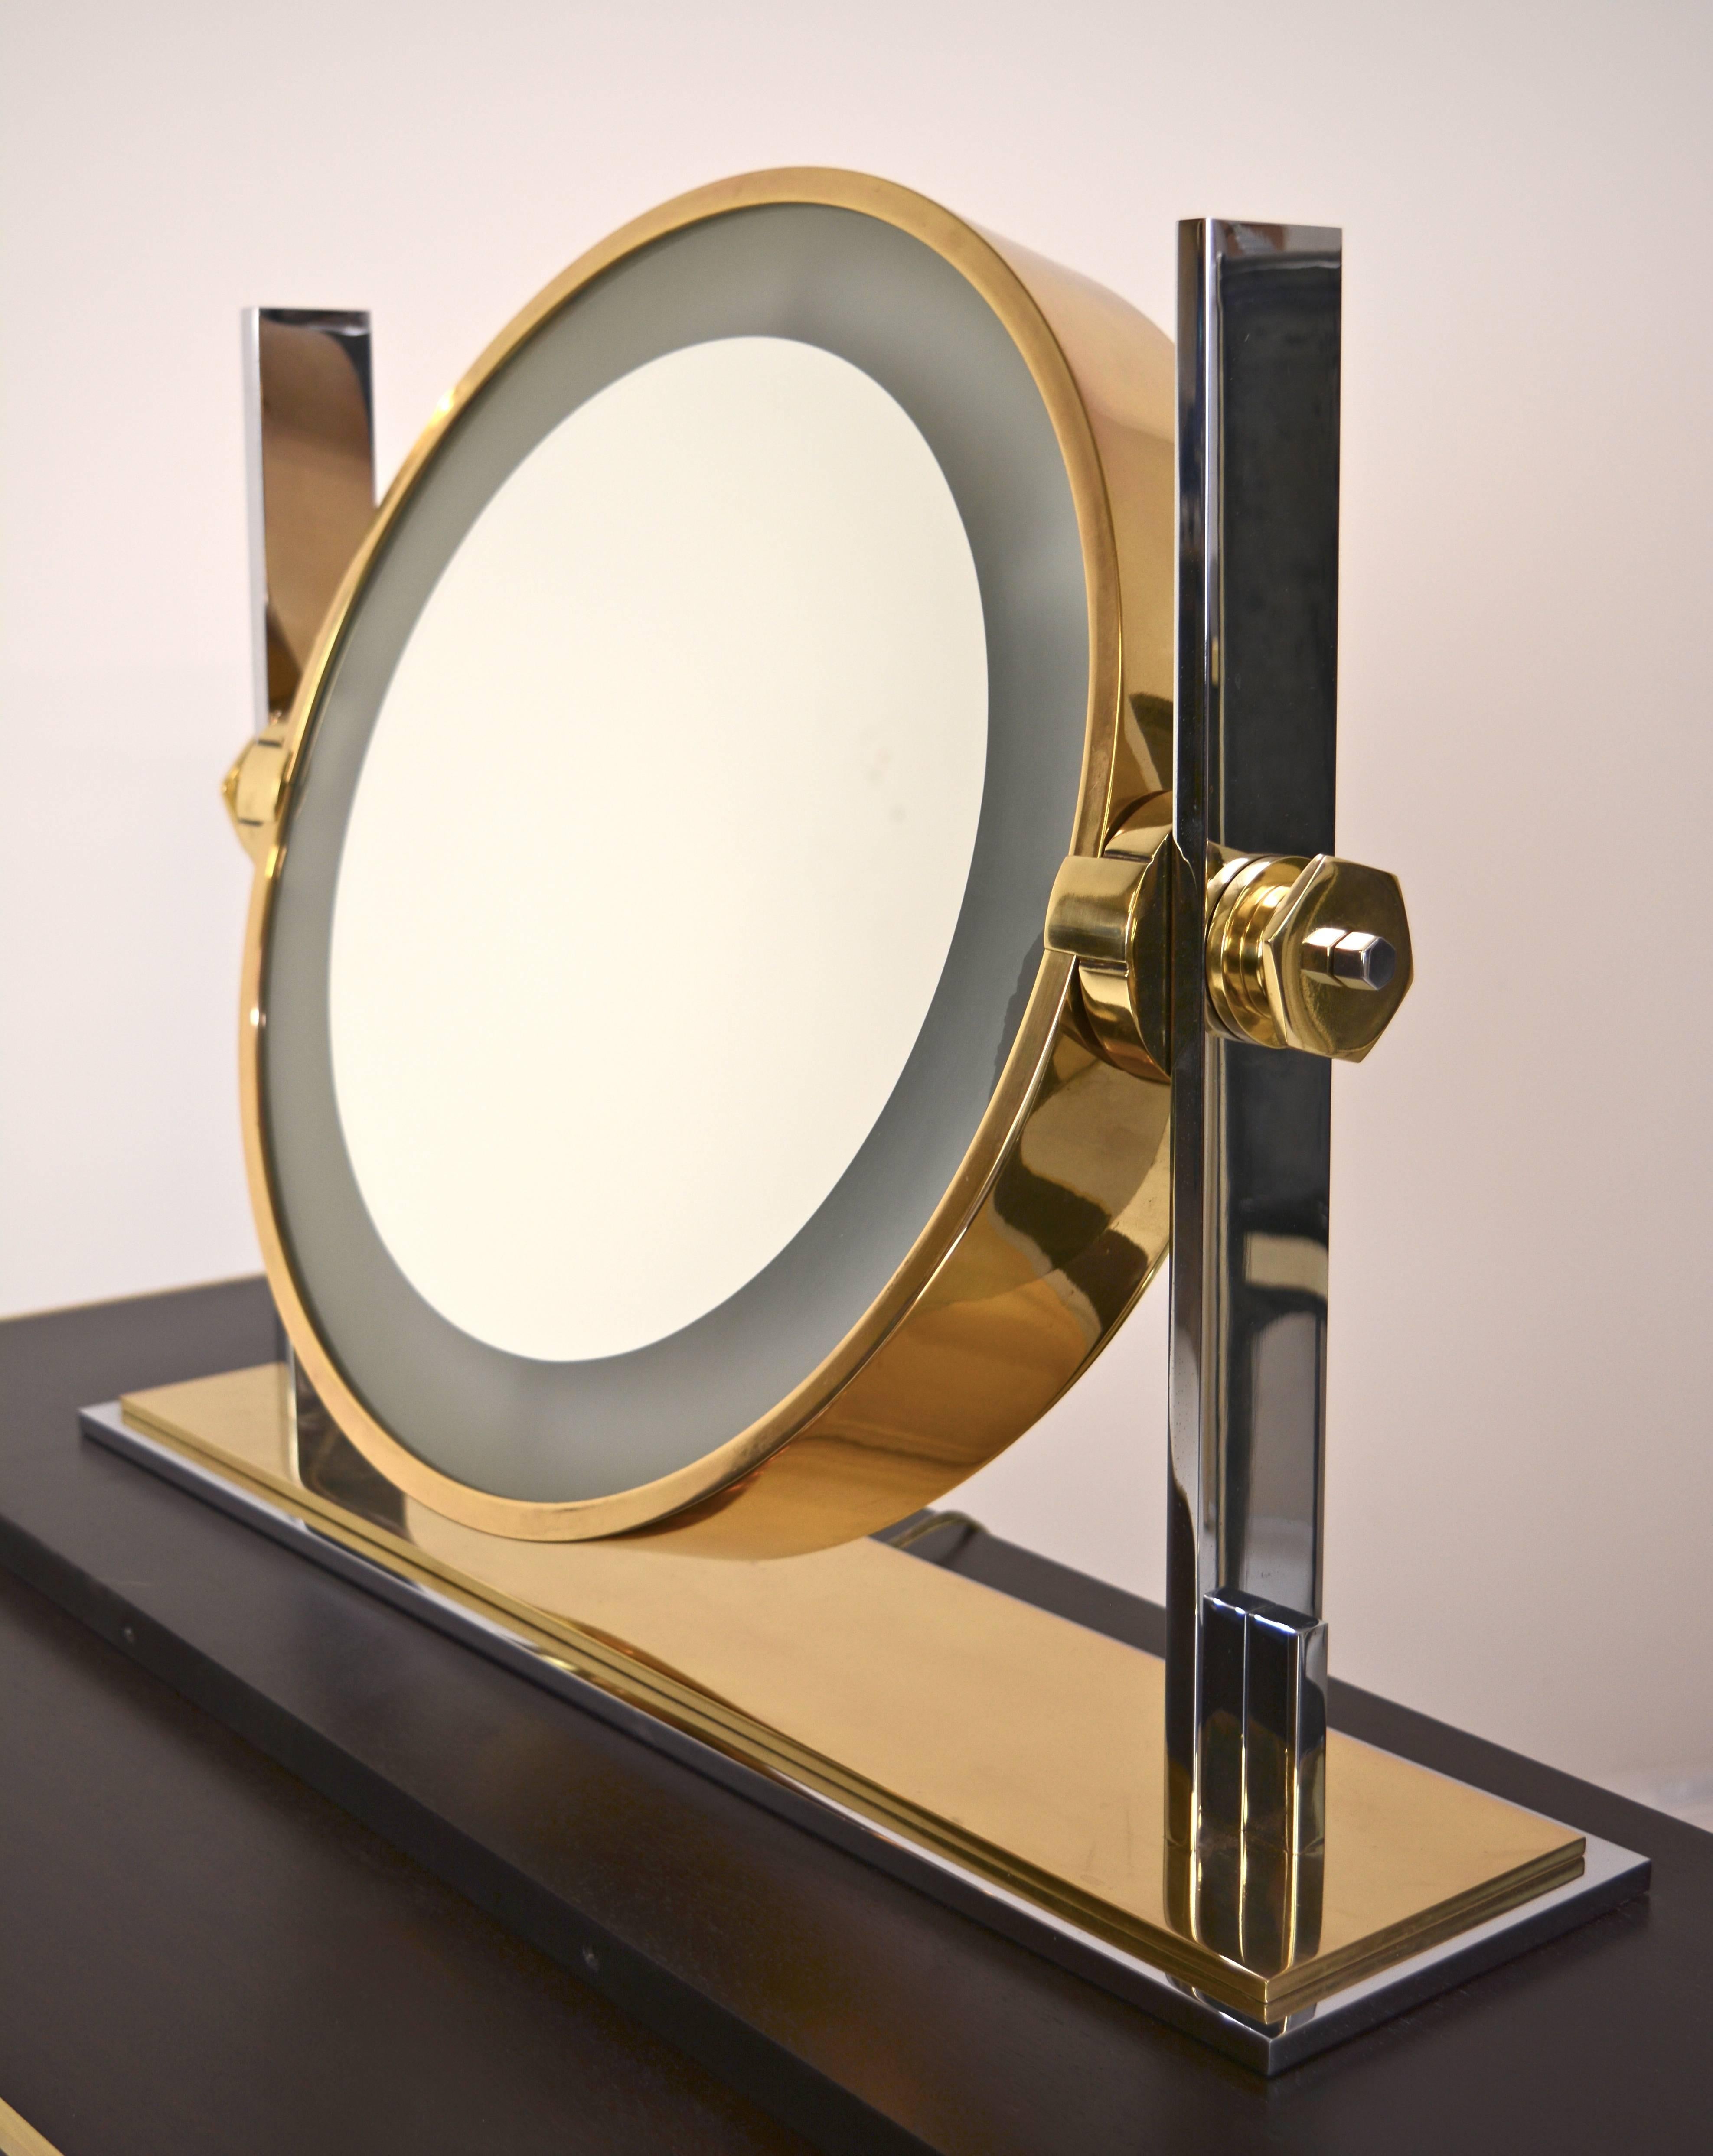 Chrome and brass vanity mirror by Karl Springer. Professionally cleaned and polished, circa 1970s.